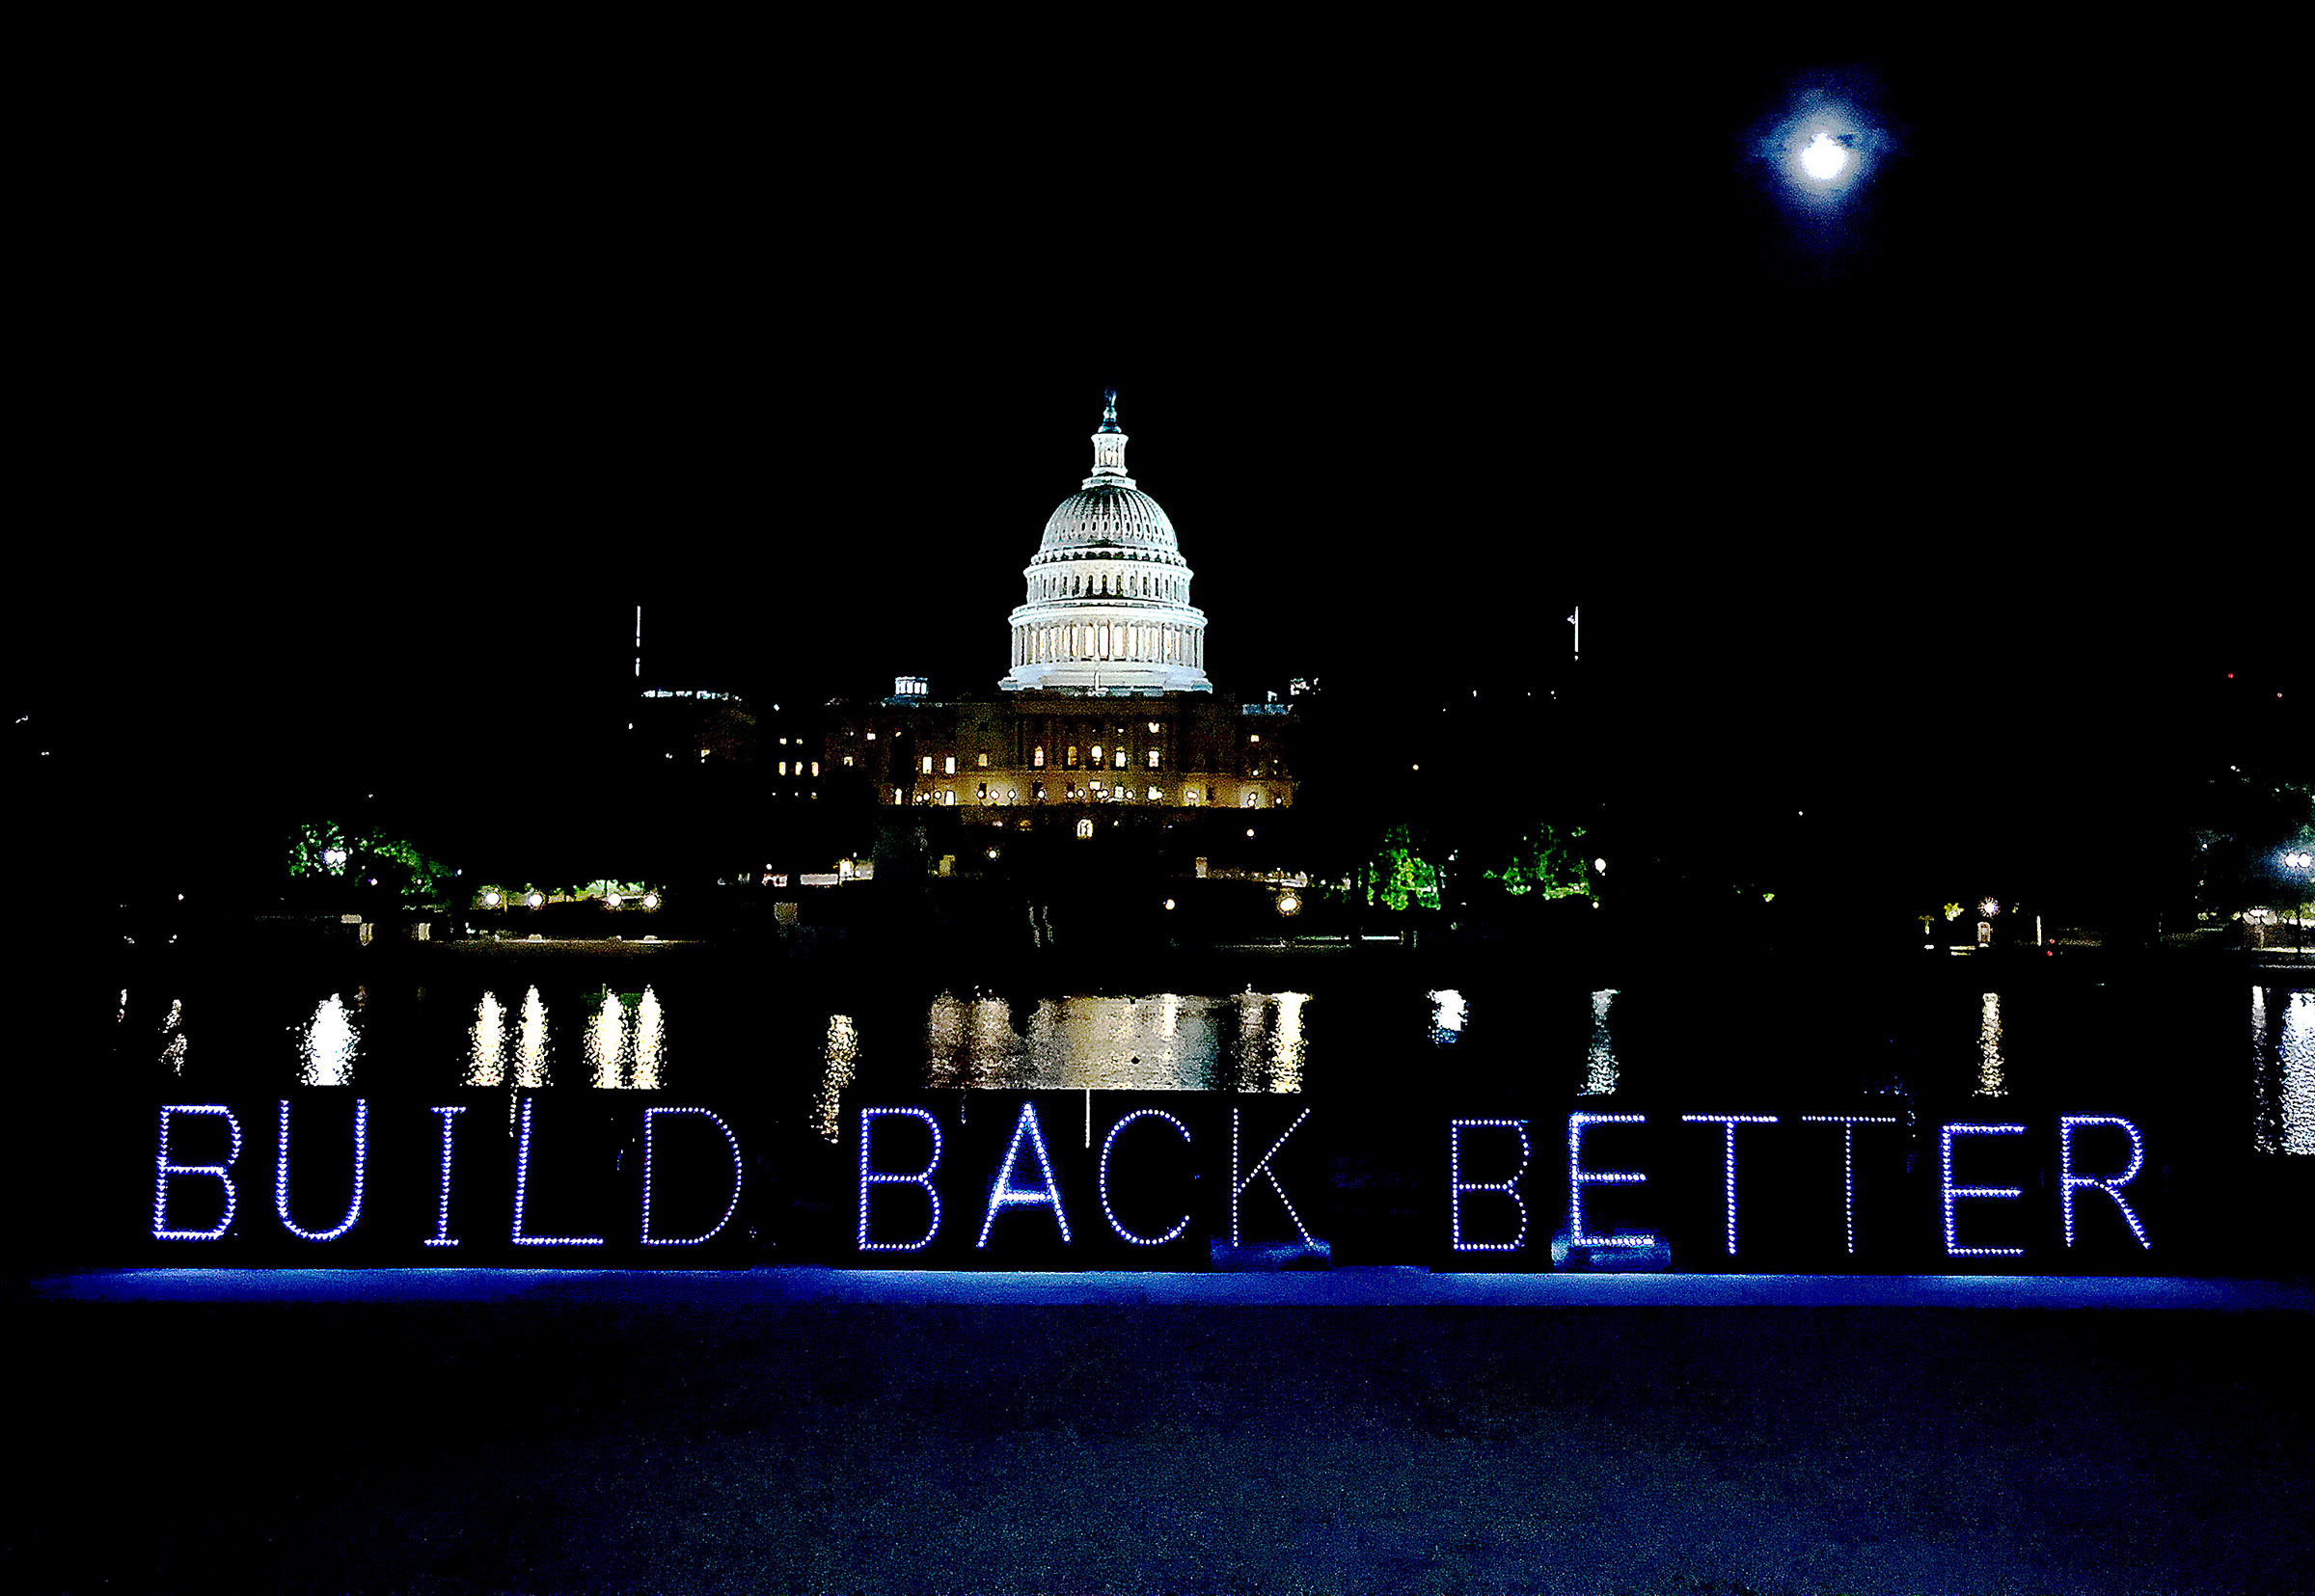 #CareCantWait Light Projection Advocating For The Passage Of "Build Back Better" Budget Reconciliation